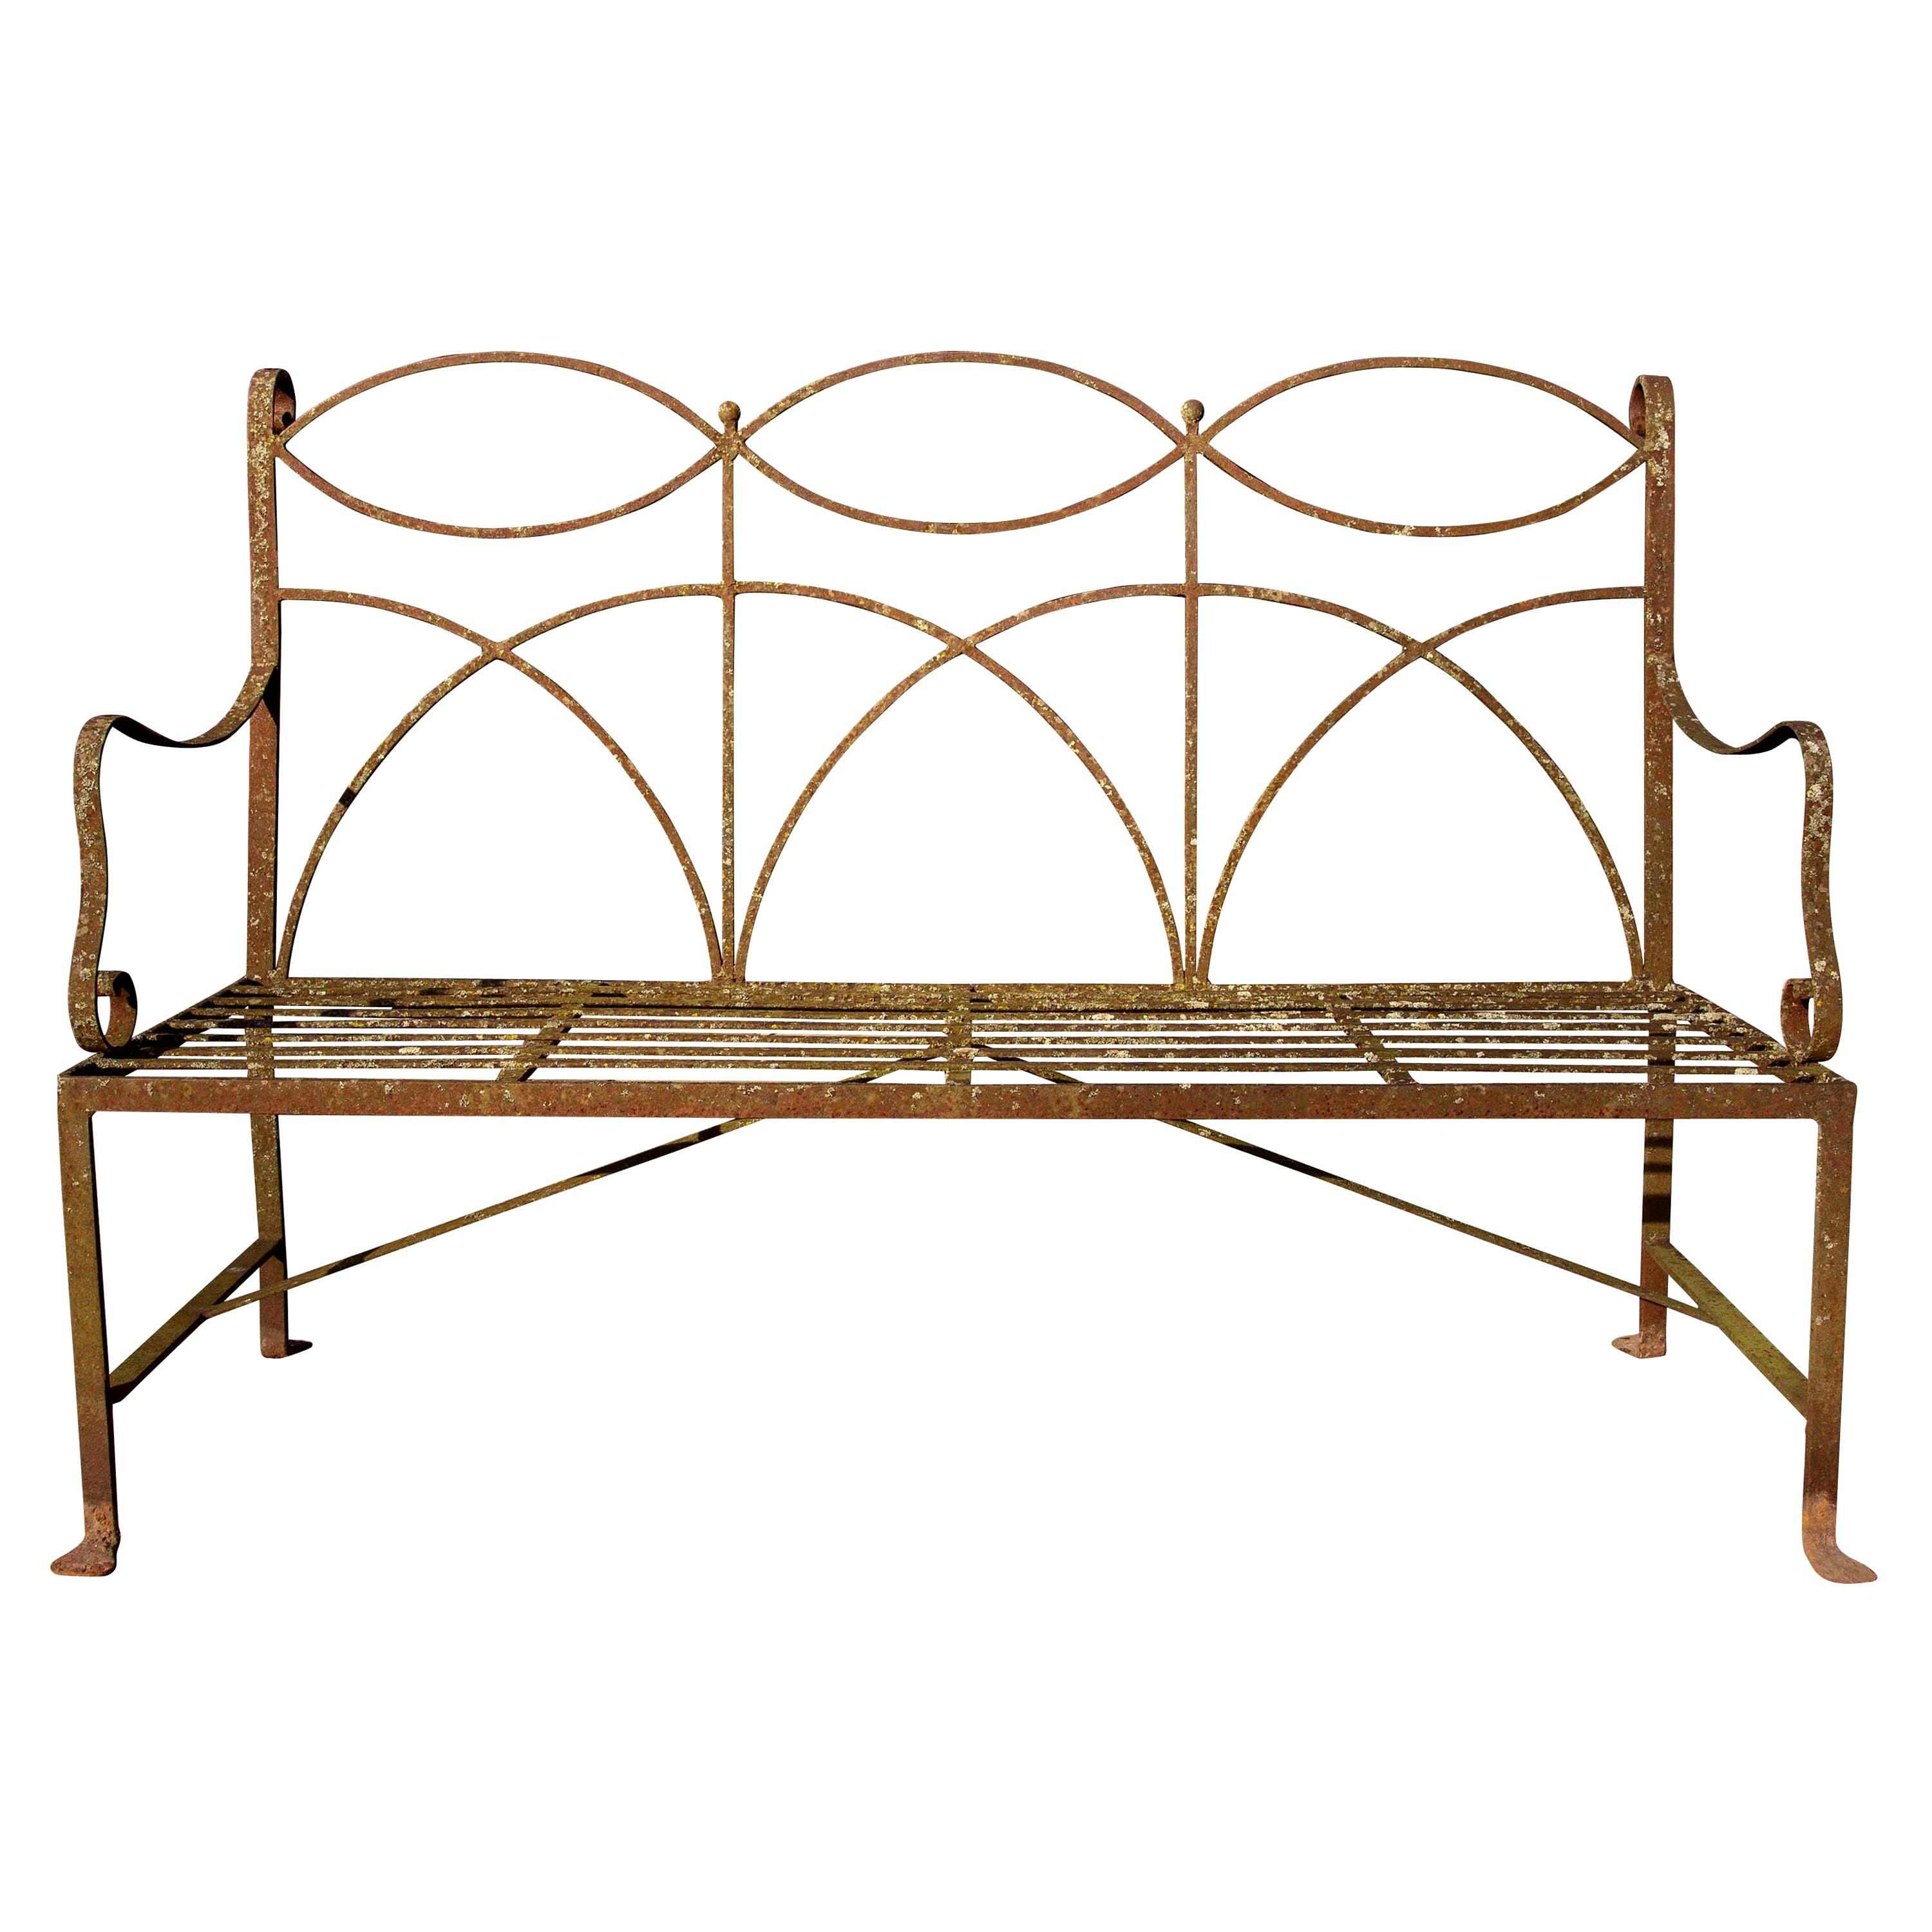 Wrought iron neoclassical garden bench. Simple elegant lines. Wonderful weathered surface. Handmade, circa 1900s-1920s. Seats four. Structurally solid.